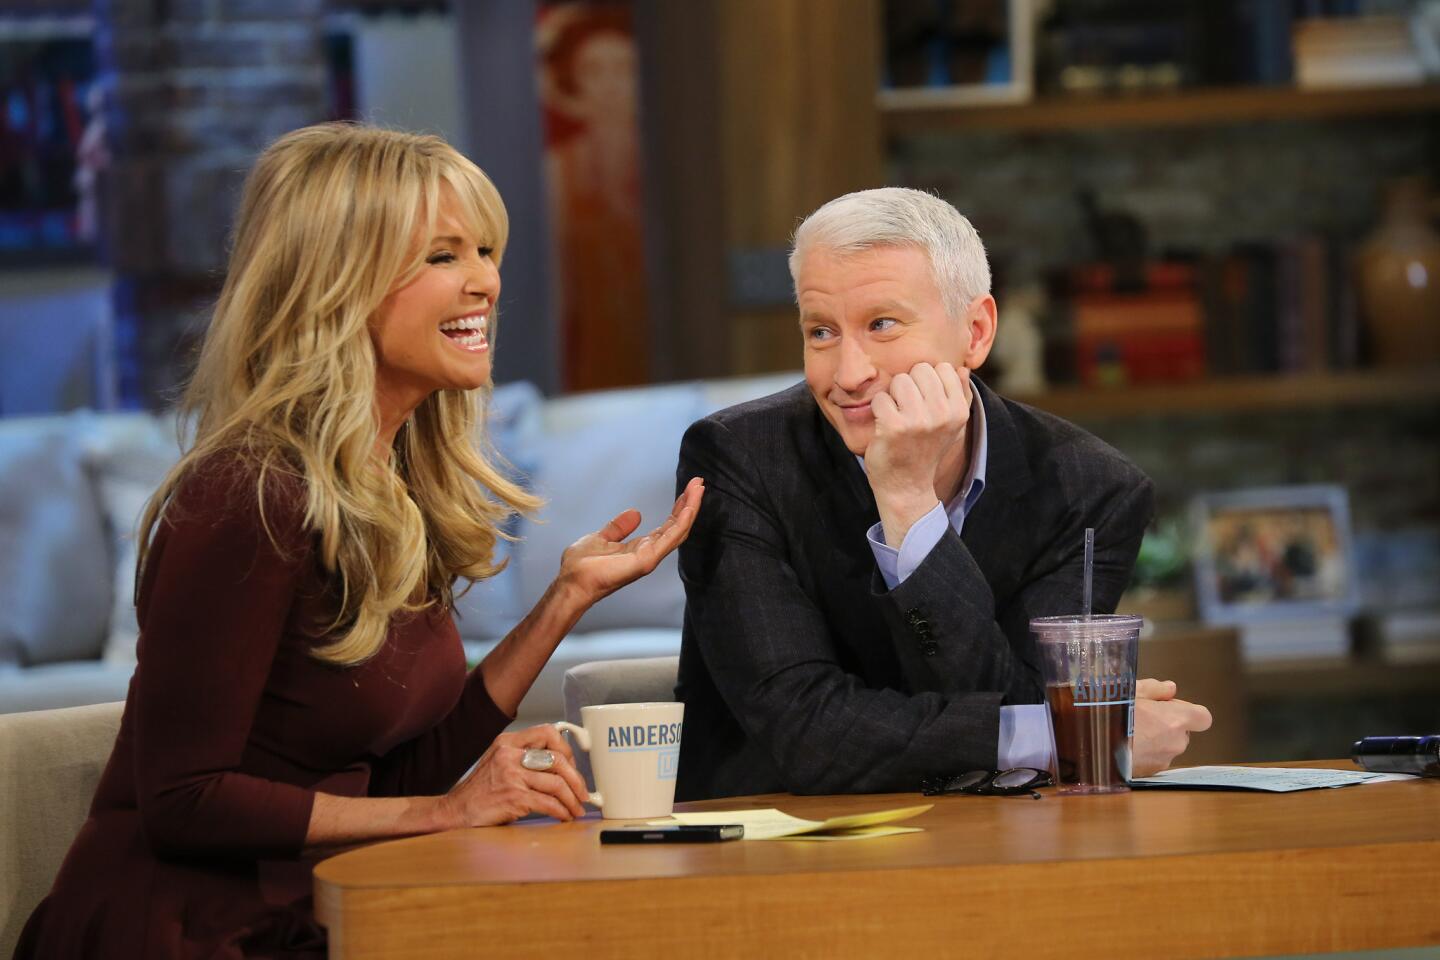 Above: Anderson Cooper with Christie Brinkley. TV journalist Anderson Cooper revealed Tuesday that a work trip had left him blind for almost two days. "Temporarily blinded last week while on assignment," the anchor shared on Instagram. "UV light bouncing off water. Much better now." Cooper was shooting a segment on the coast of Portugal when apparently glare did some damage. "I wake up in the middle of the night and it feels like my eyes are on fire," he said on "Anderson Live," via People. Full story: Anderson Cooper temporarily blind after a gig in Portugal